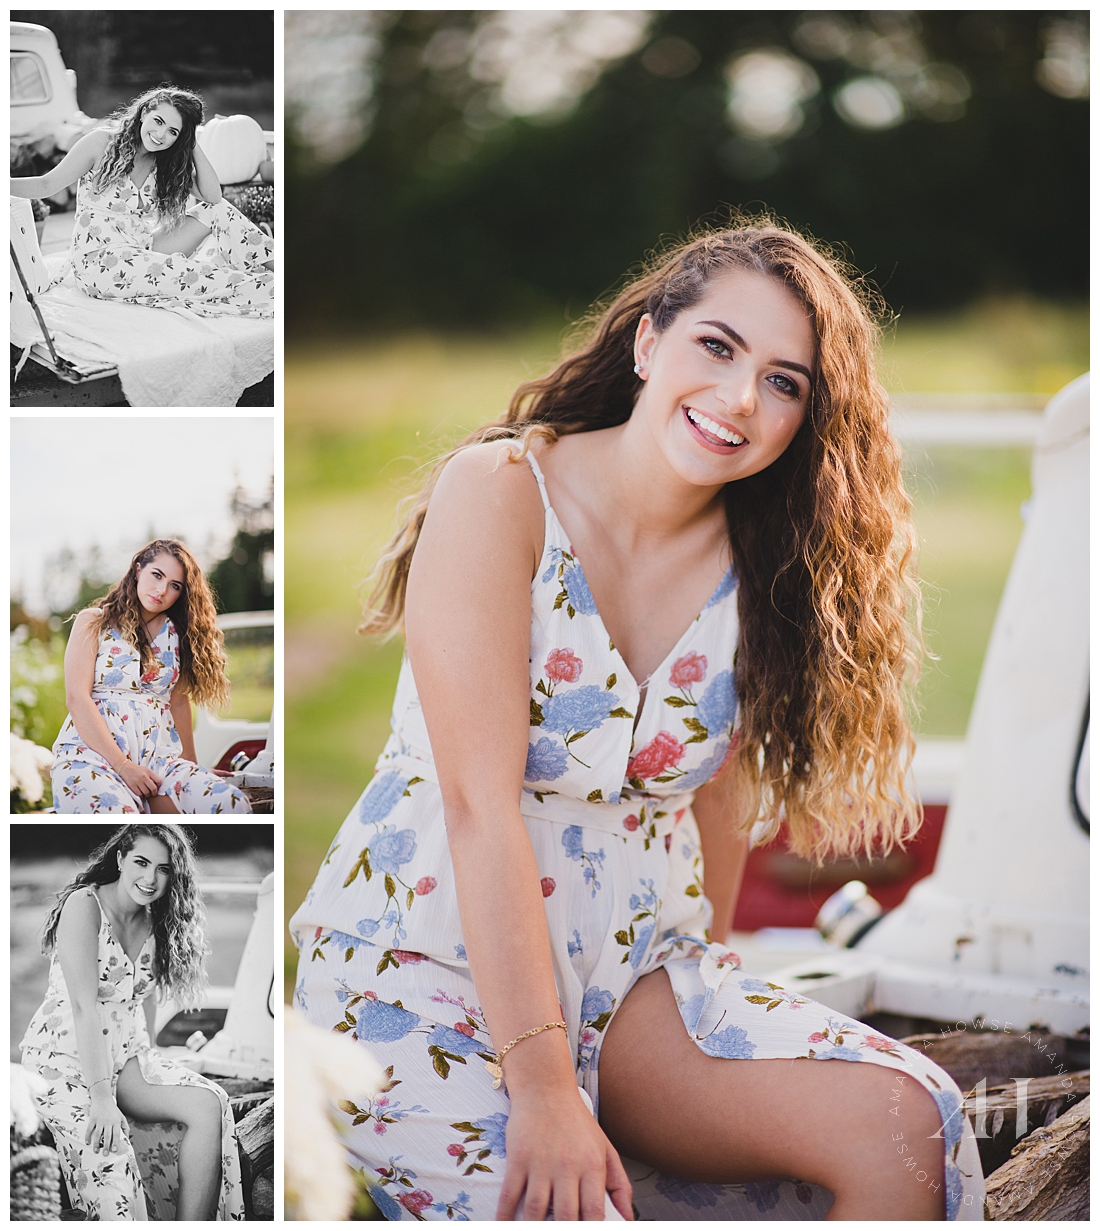 Senior portraits with a vintage white truck and white floral dress photographed by Tacoma Senior Photographer Amanda Howse